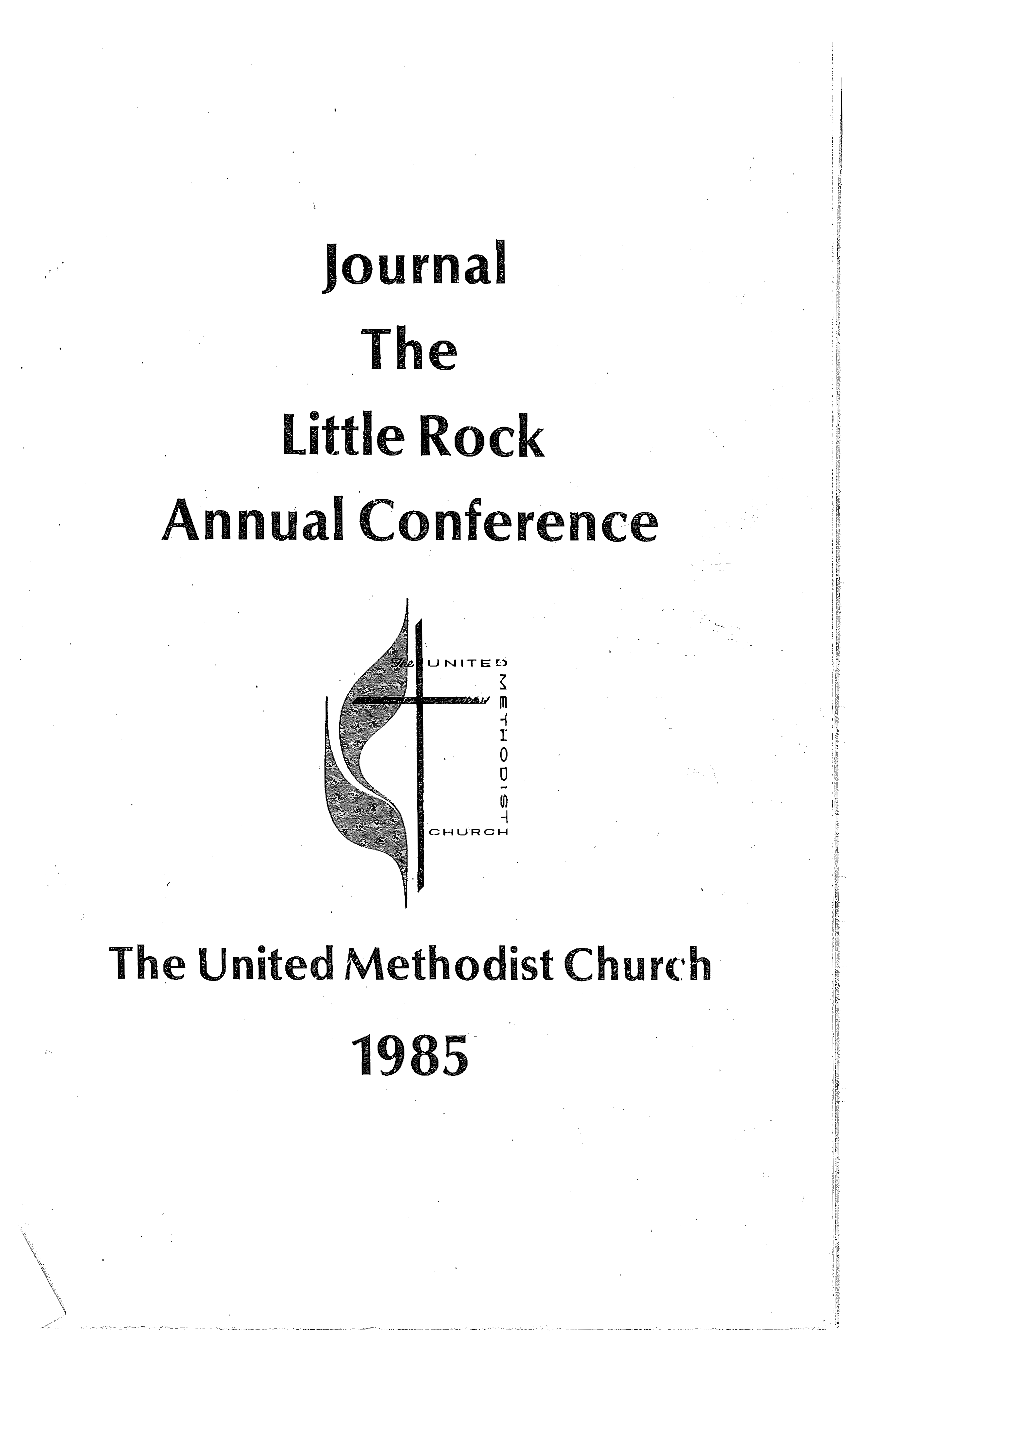 Journal the Little Rock Annual Conference